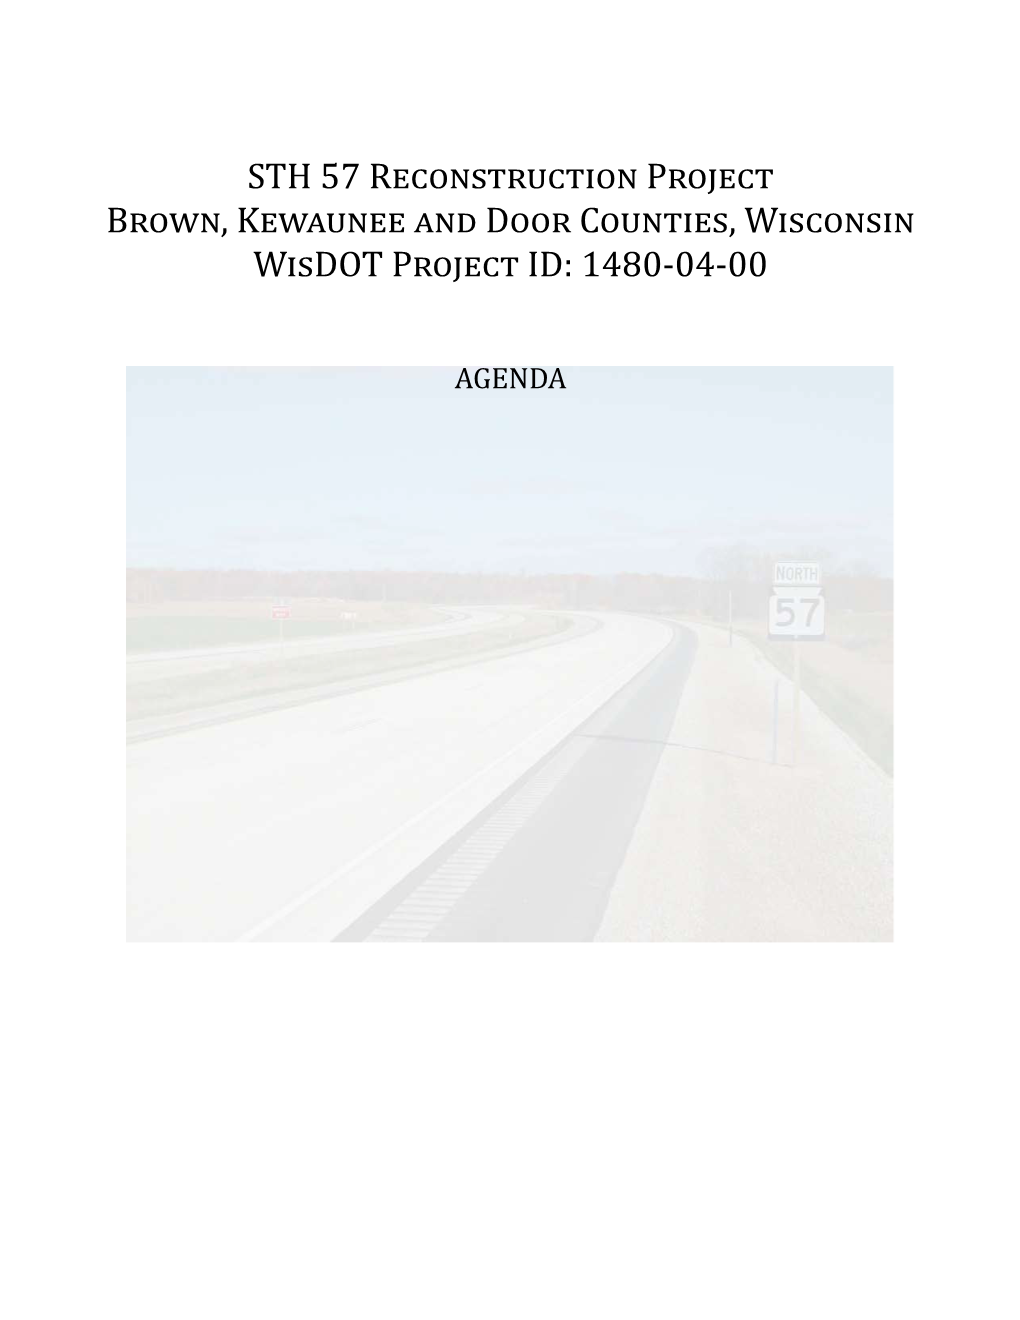 STH 57 Reconstruction Project Brown, Kewaunee and Door Counties, Wisconsin Wisdot Project ID: 1480-04-00